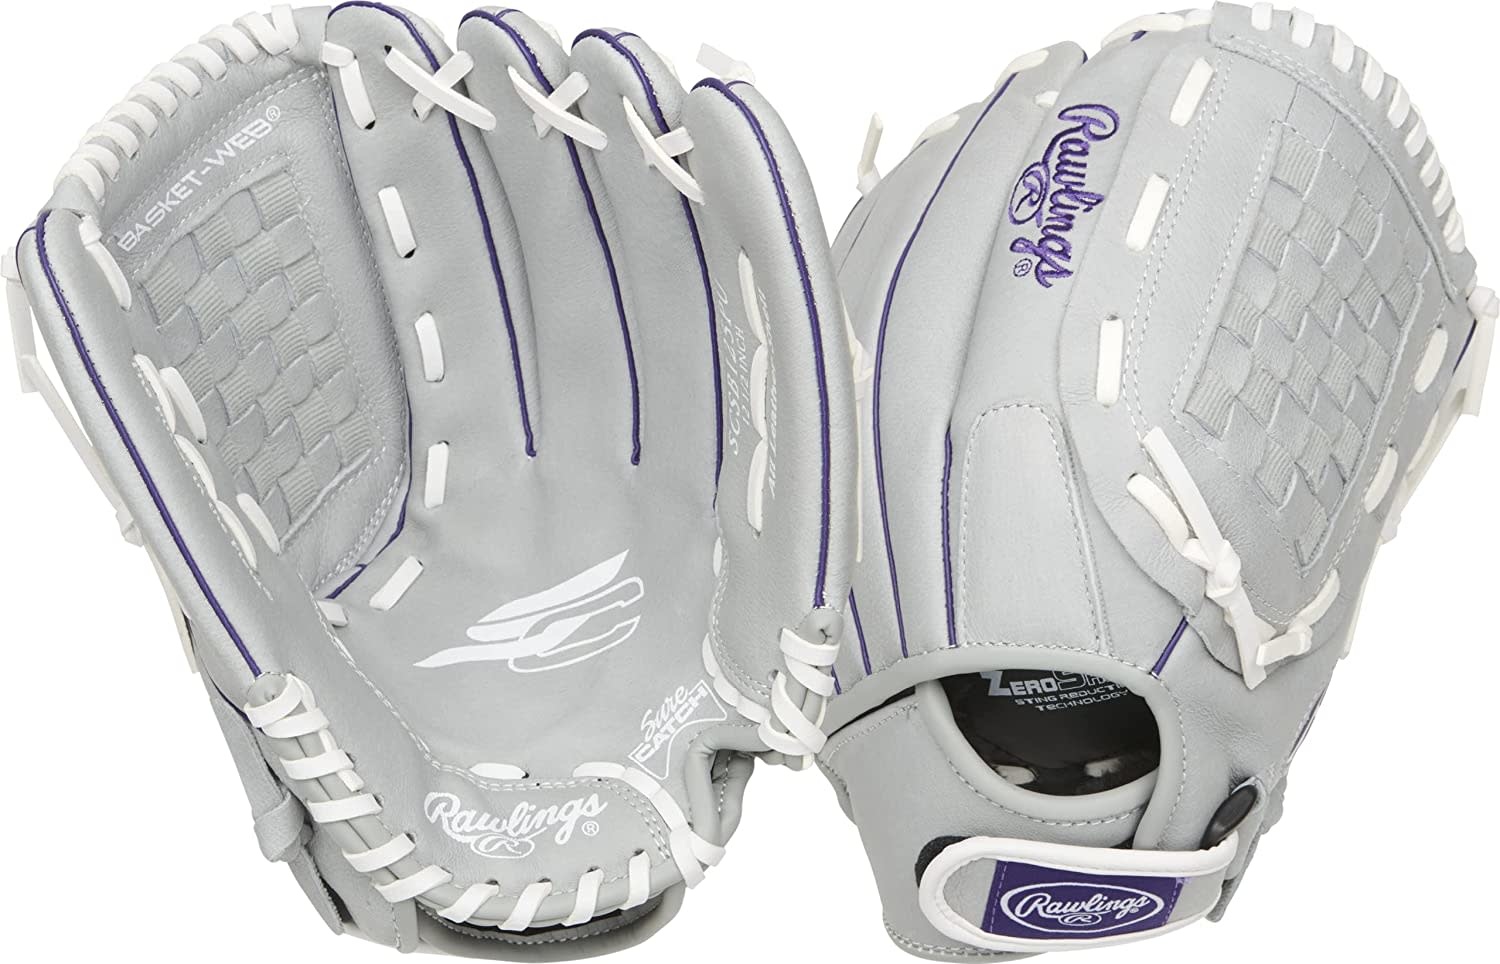 Copy of Rawlings Sure Catch softball SCSB115M 11 1/2'' RHT